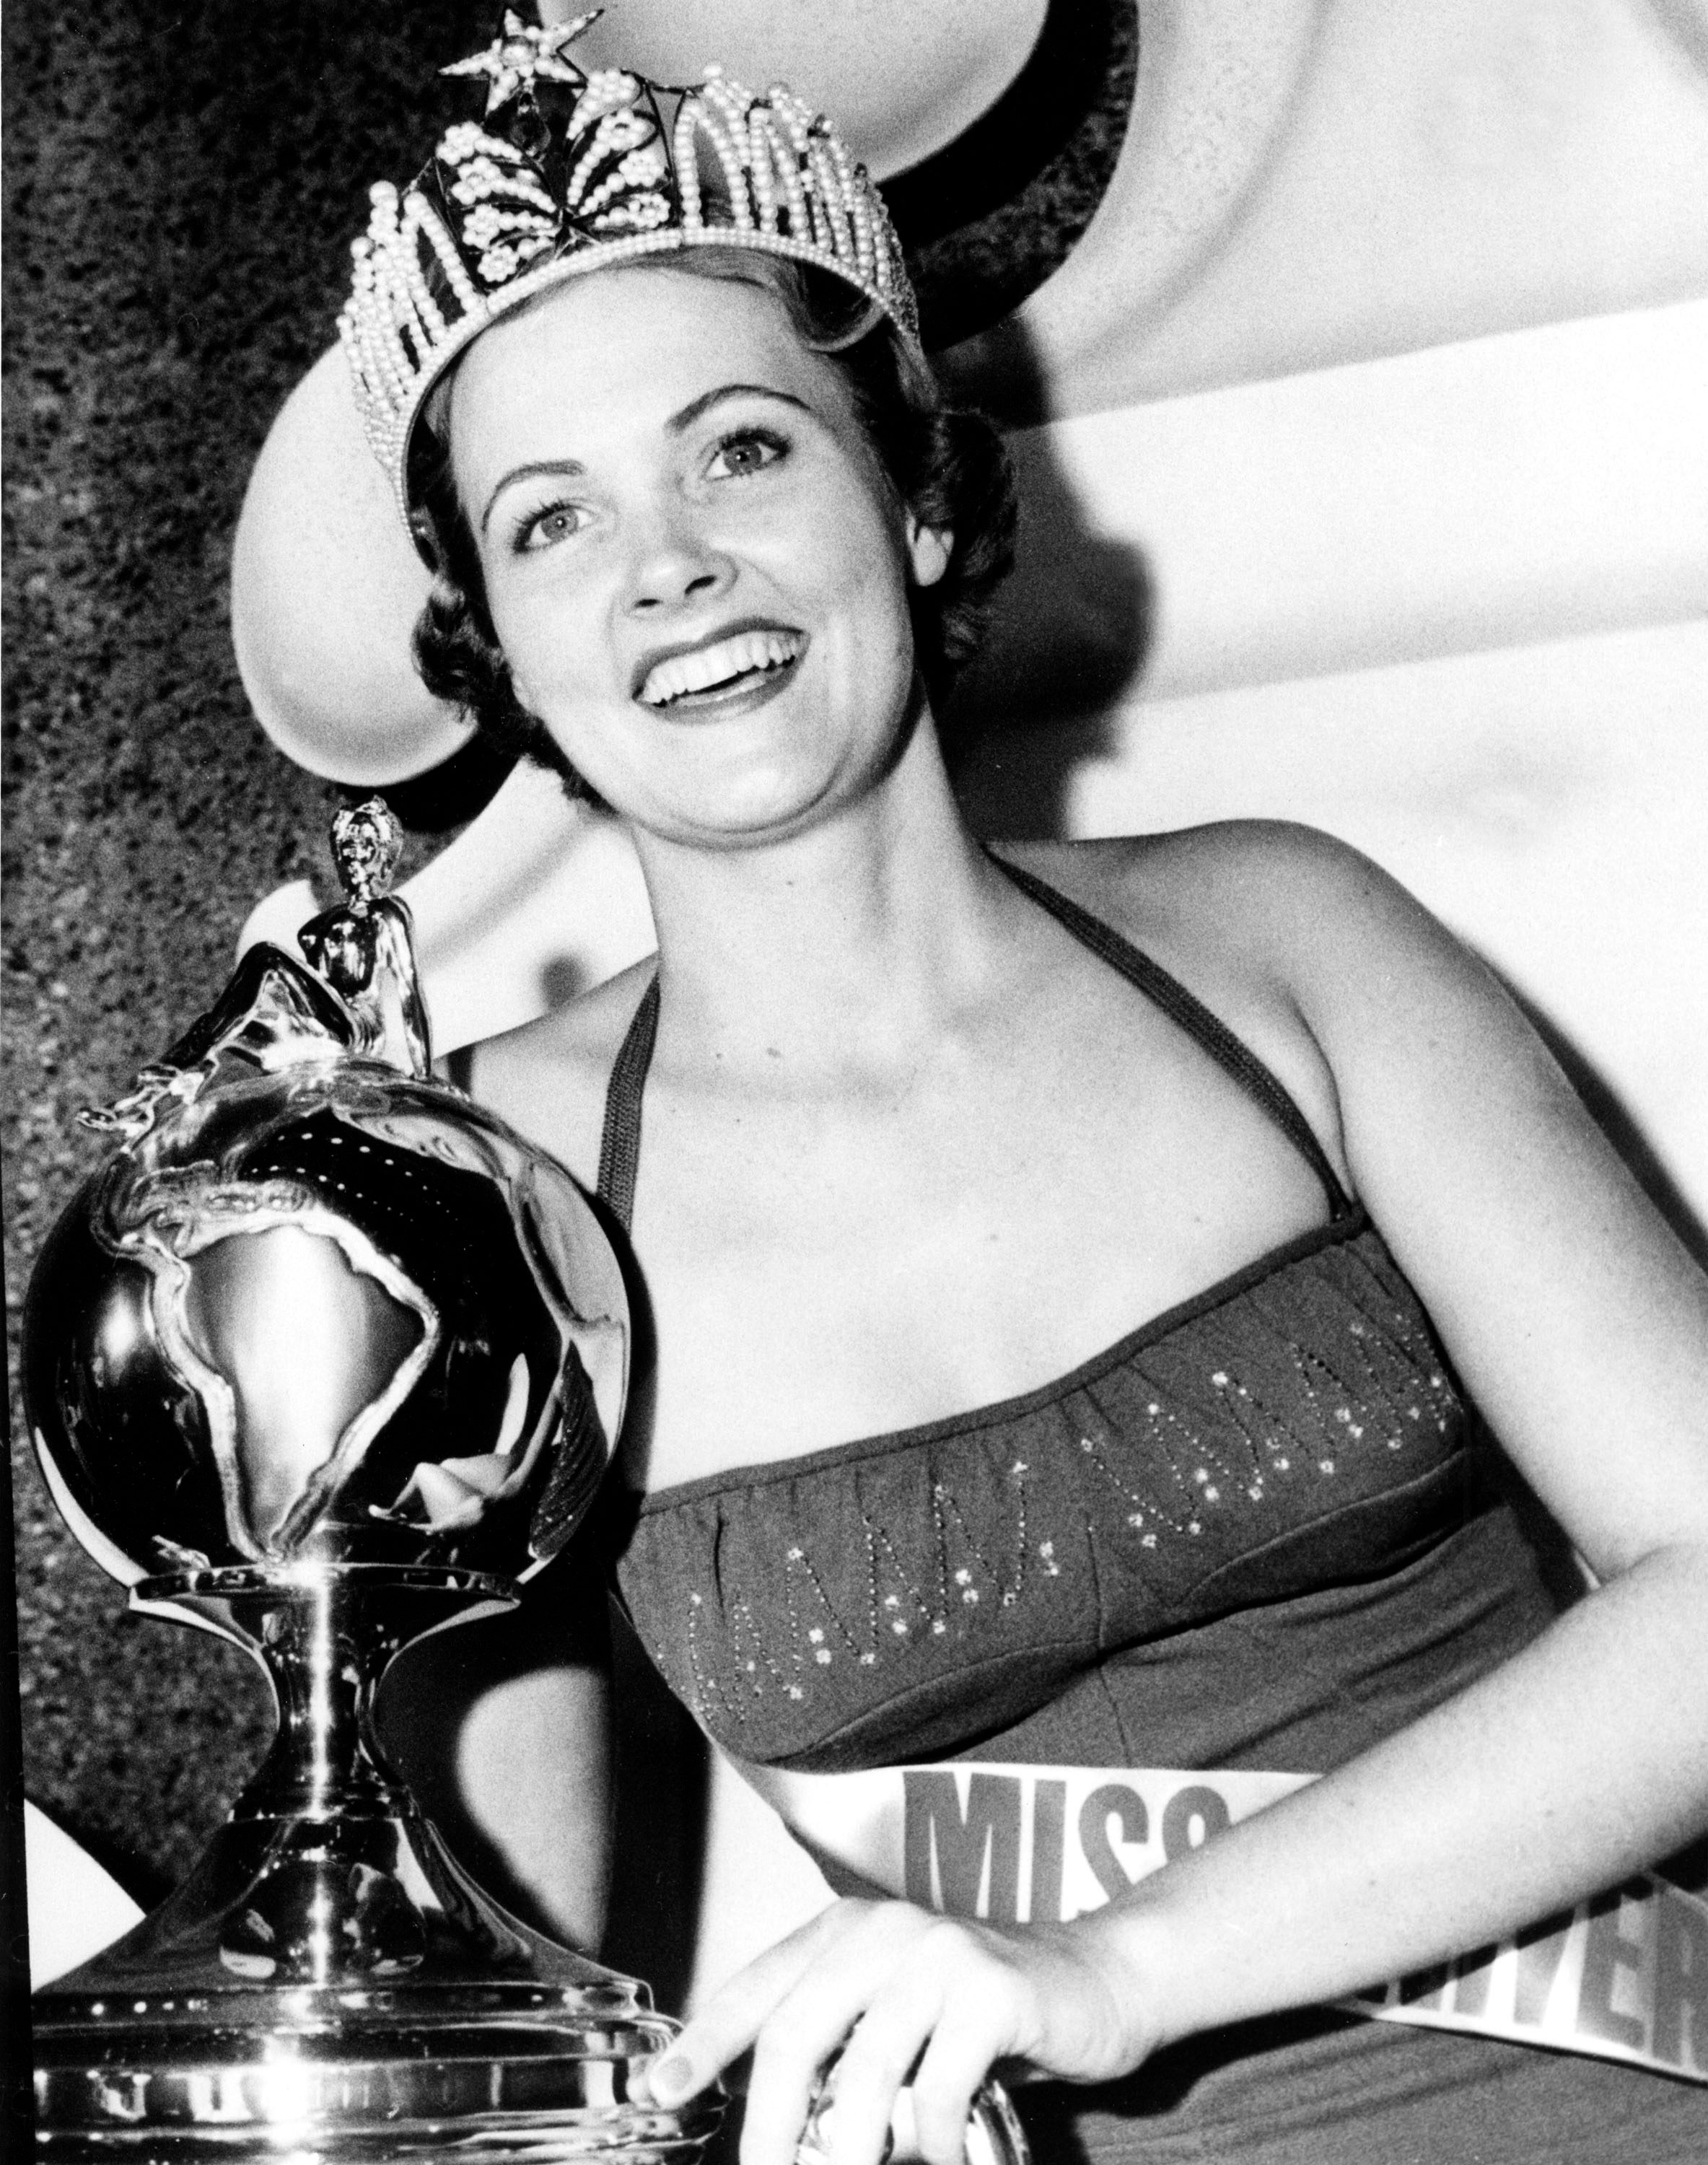 Miriam Stevenson, Miss USA 1954, from South Carolina, was the first Miss USA to become Miss Universe. She was also the first titleholder to obtain a college degree while holding the title. Photo from Miss Universe Organization 